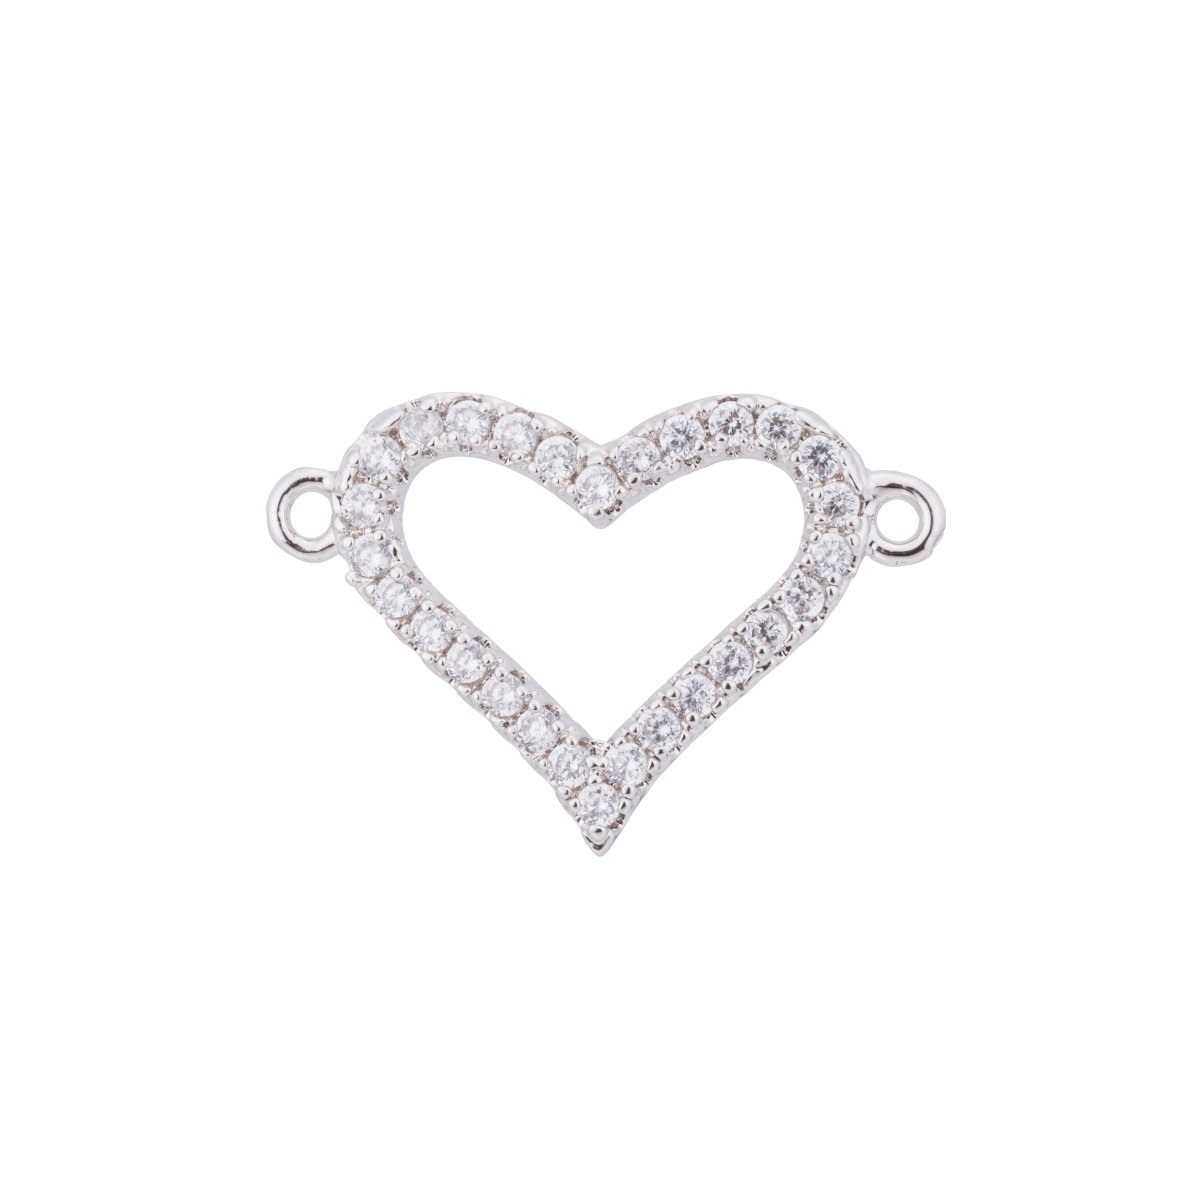 Silver I Love You Charm, Heart Charm, Love Charm Bracelet, DIY Cubic Zirconia Pave Bracelet Charm Bead Connector For Jewelry Making F-577 - DLUXCA